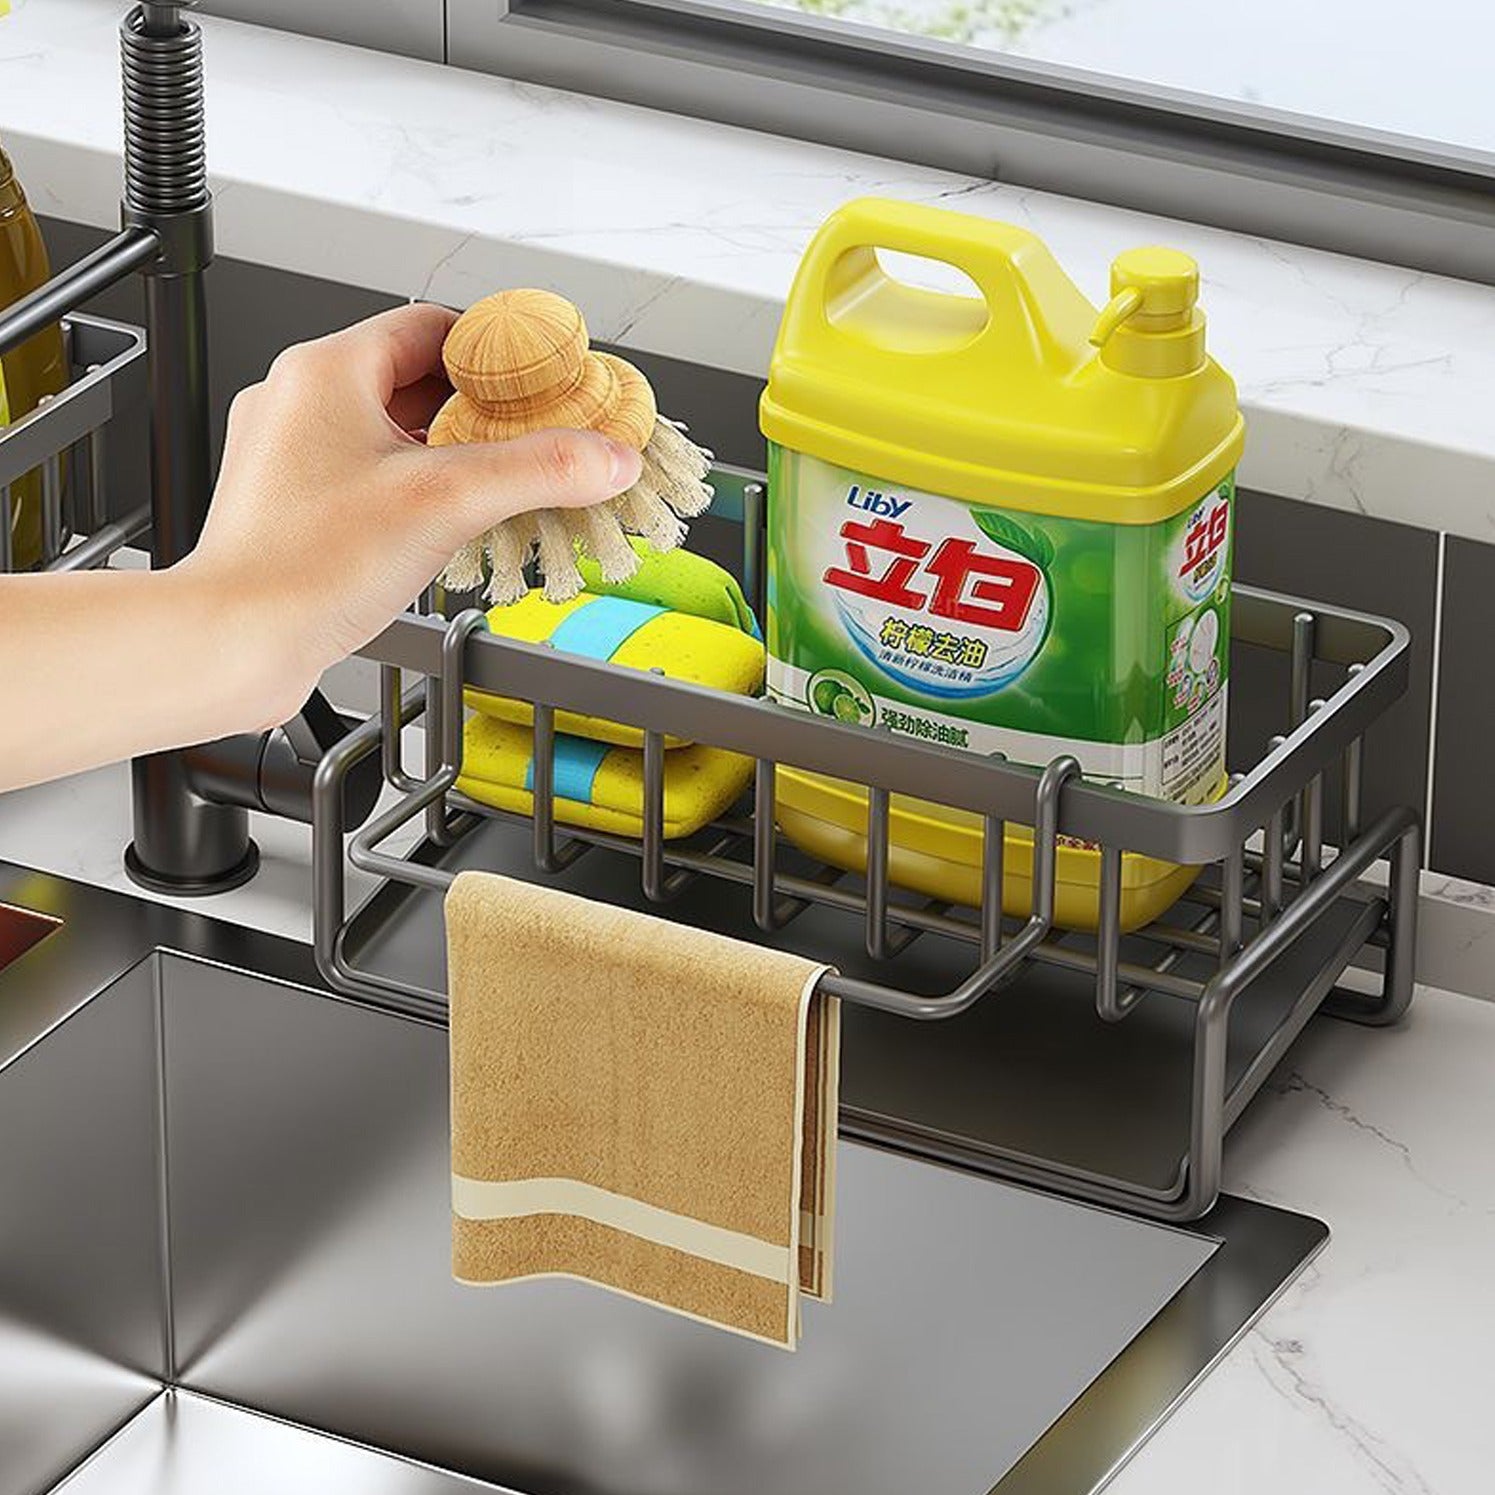 Someone placing something into the Rustproof Stainless Steel Sink Organizer Rack